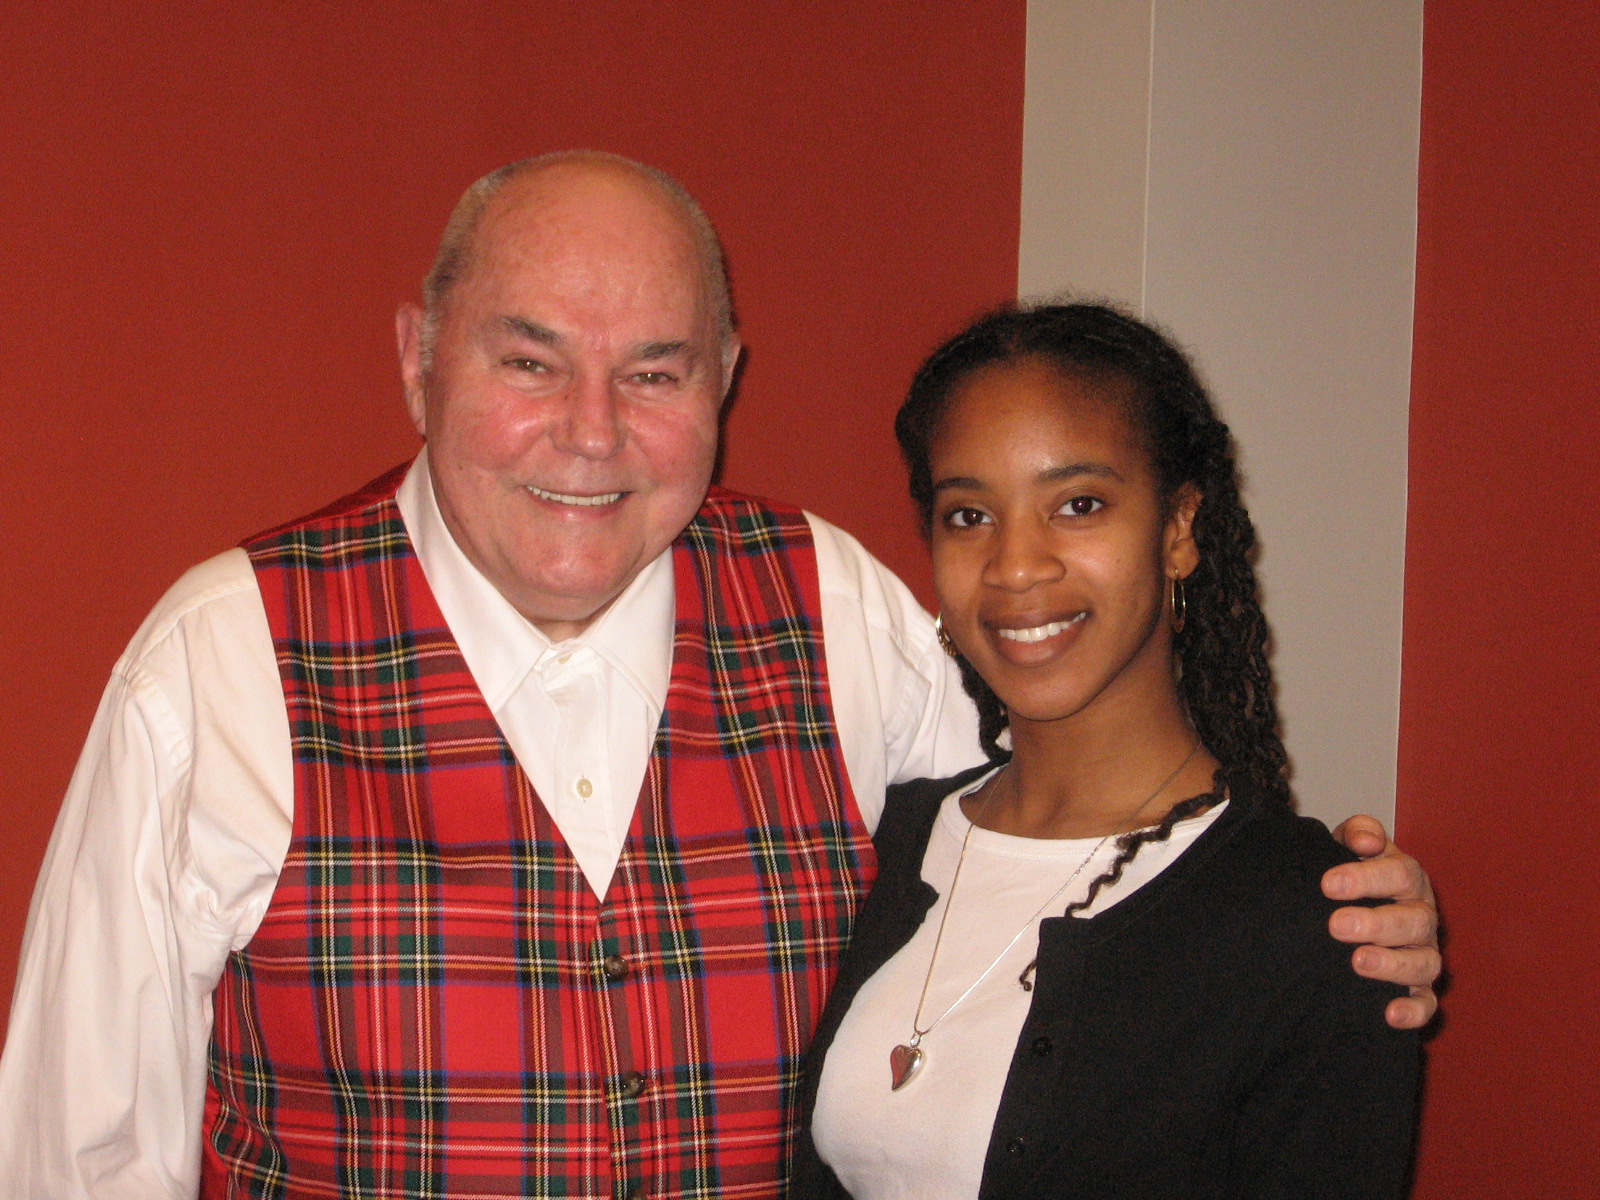 Dr. Hunter loved poetry and returned to campus to attend and participate in poetry readings. He is pictured here with a student at a poetry reading.